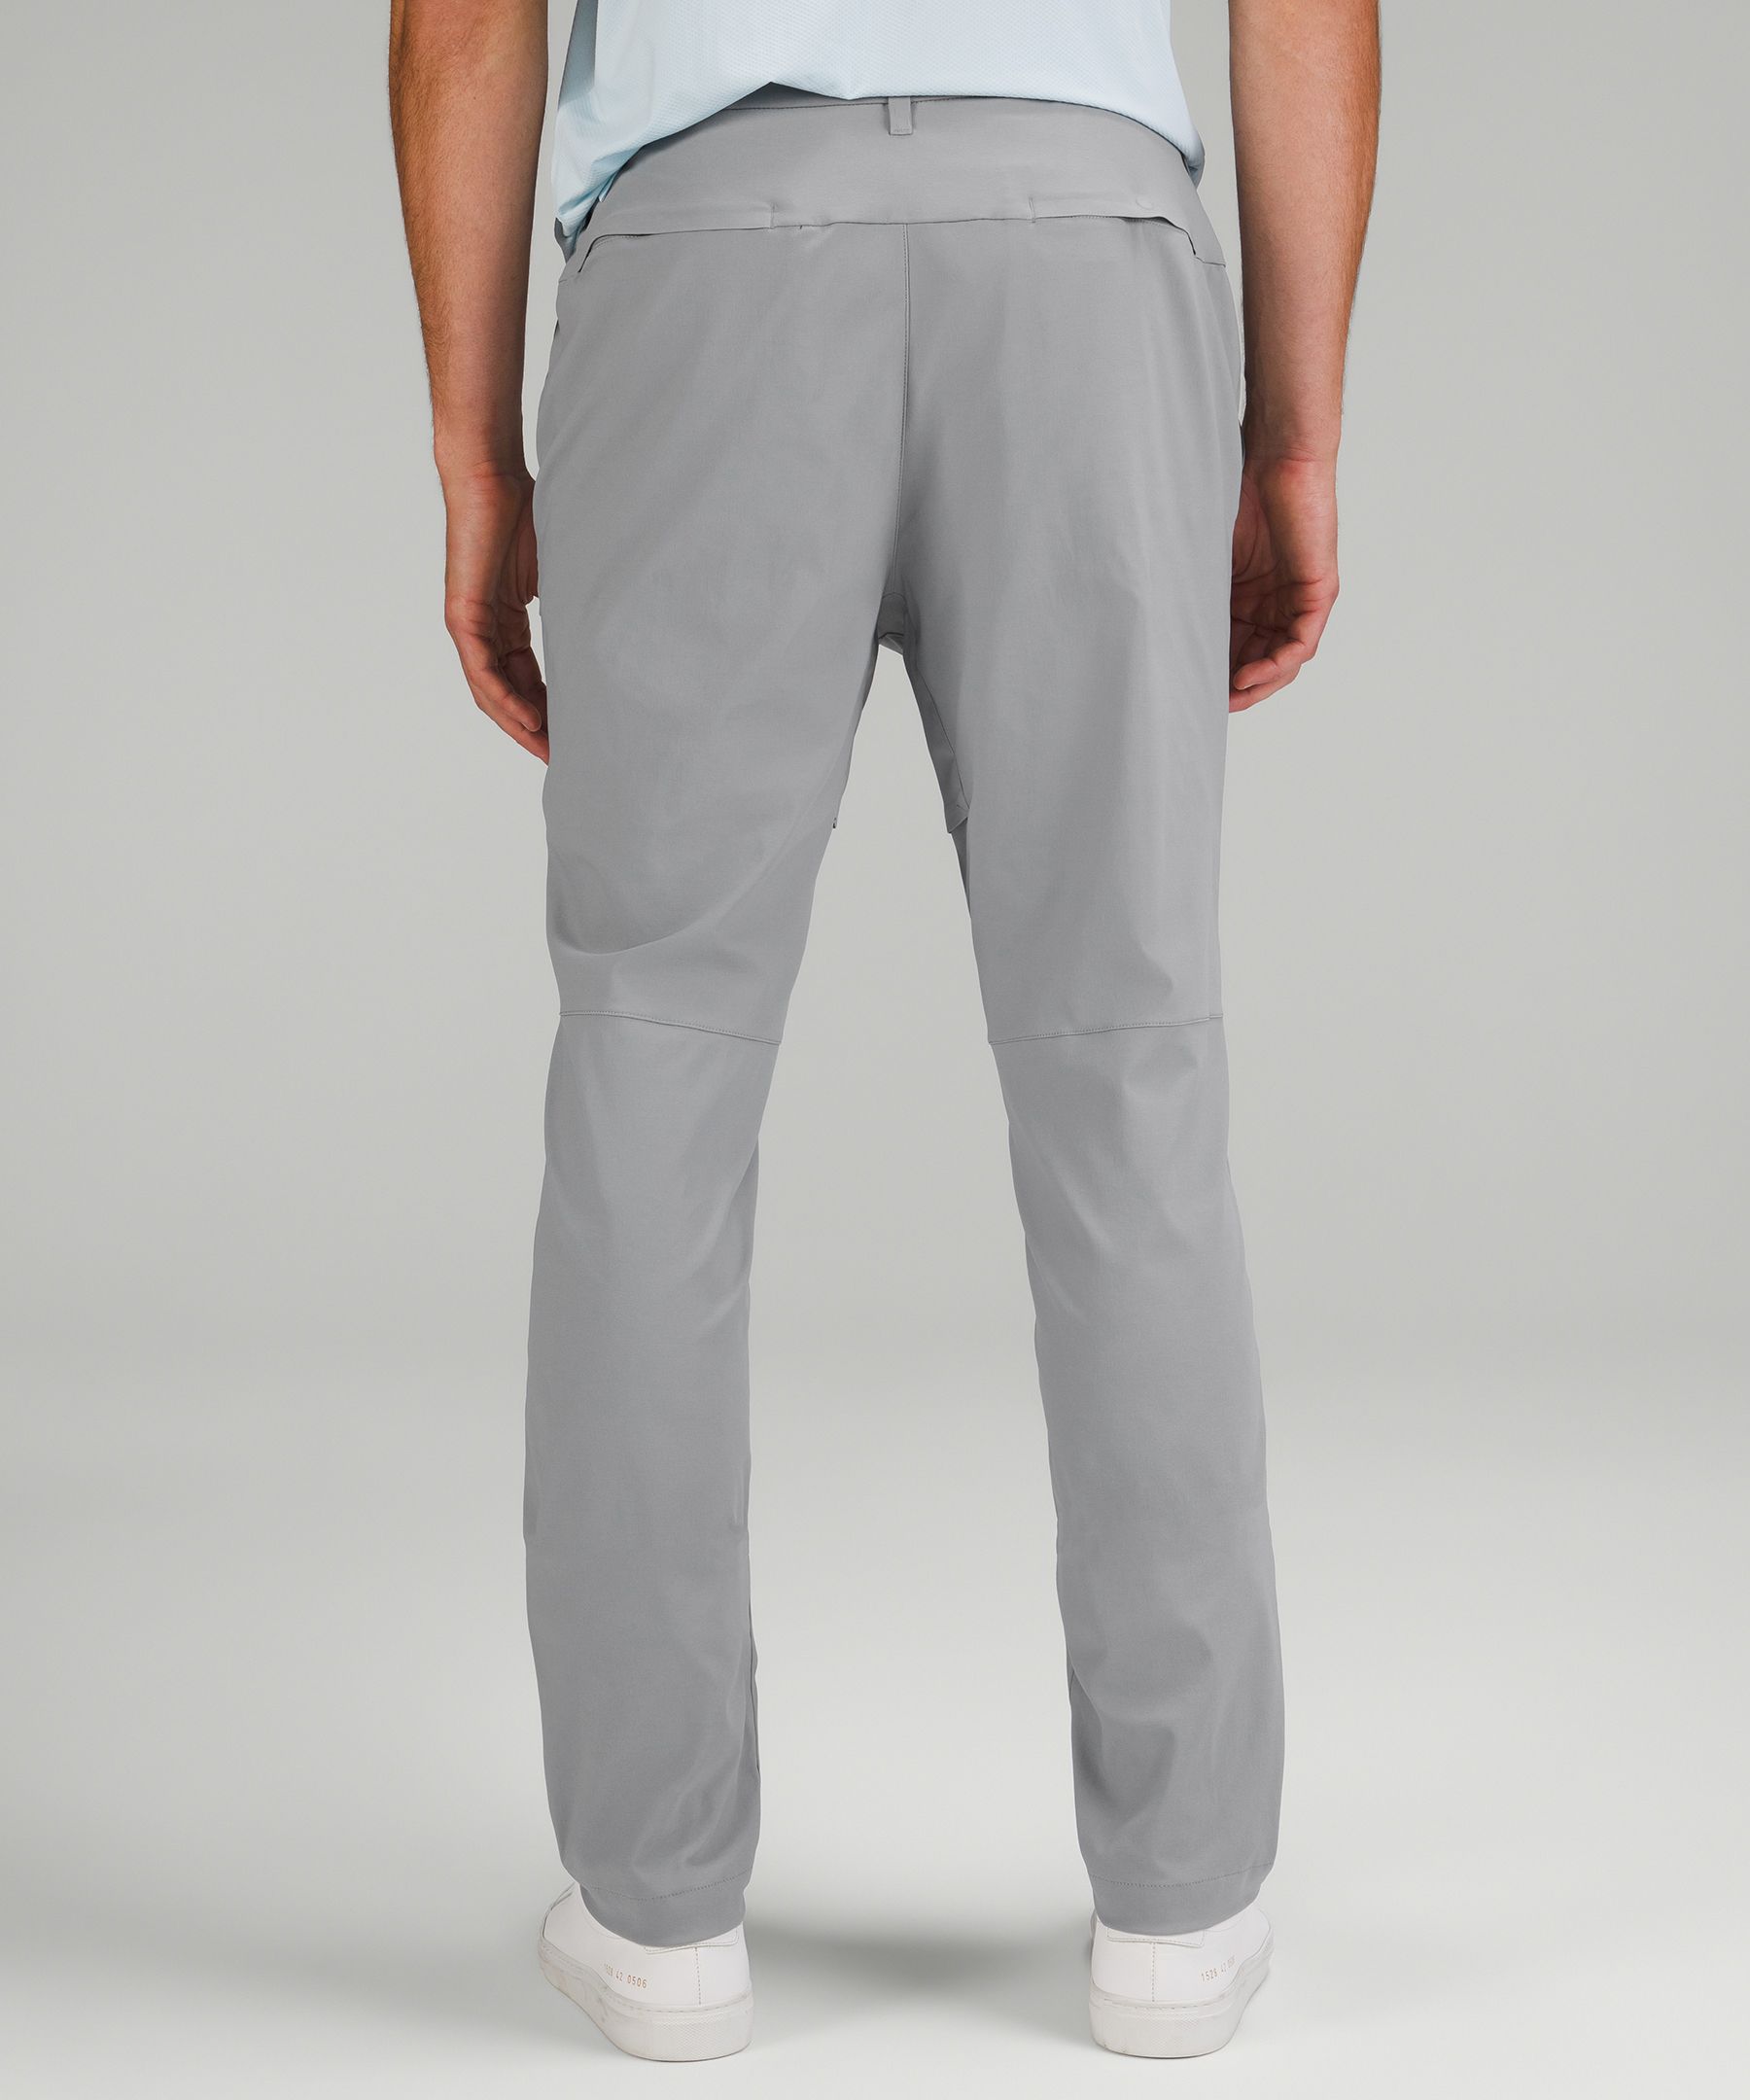 Lululemon Golf Trousers  International Society of Precision Agriculture